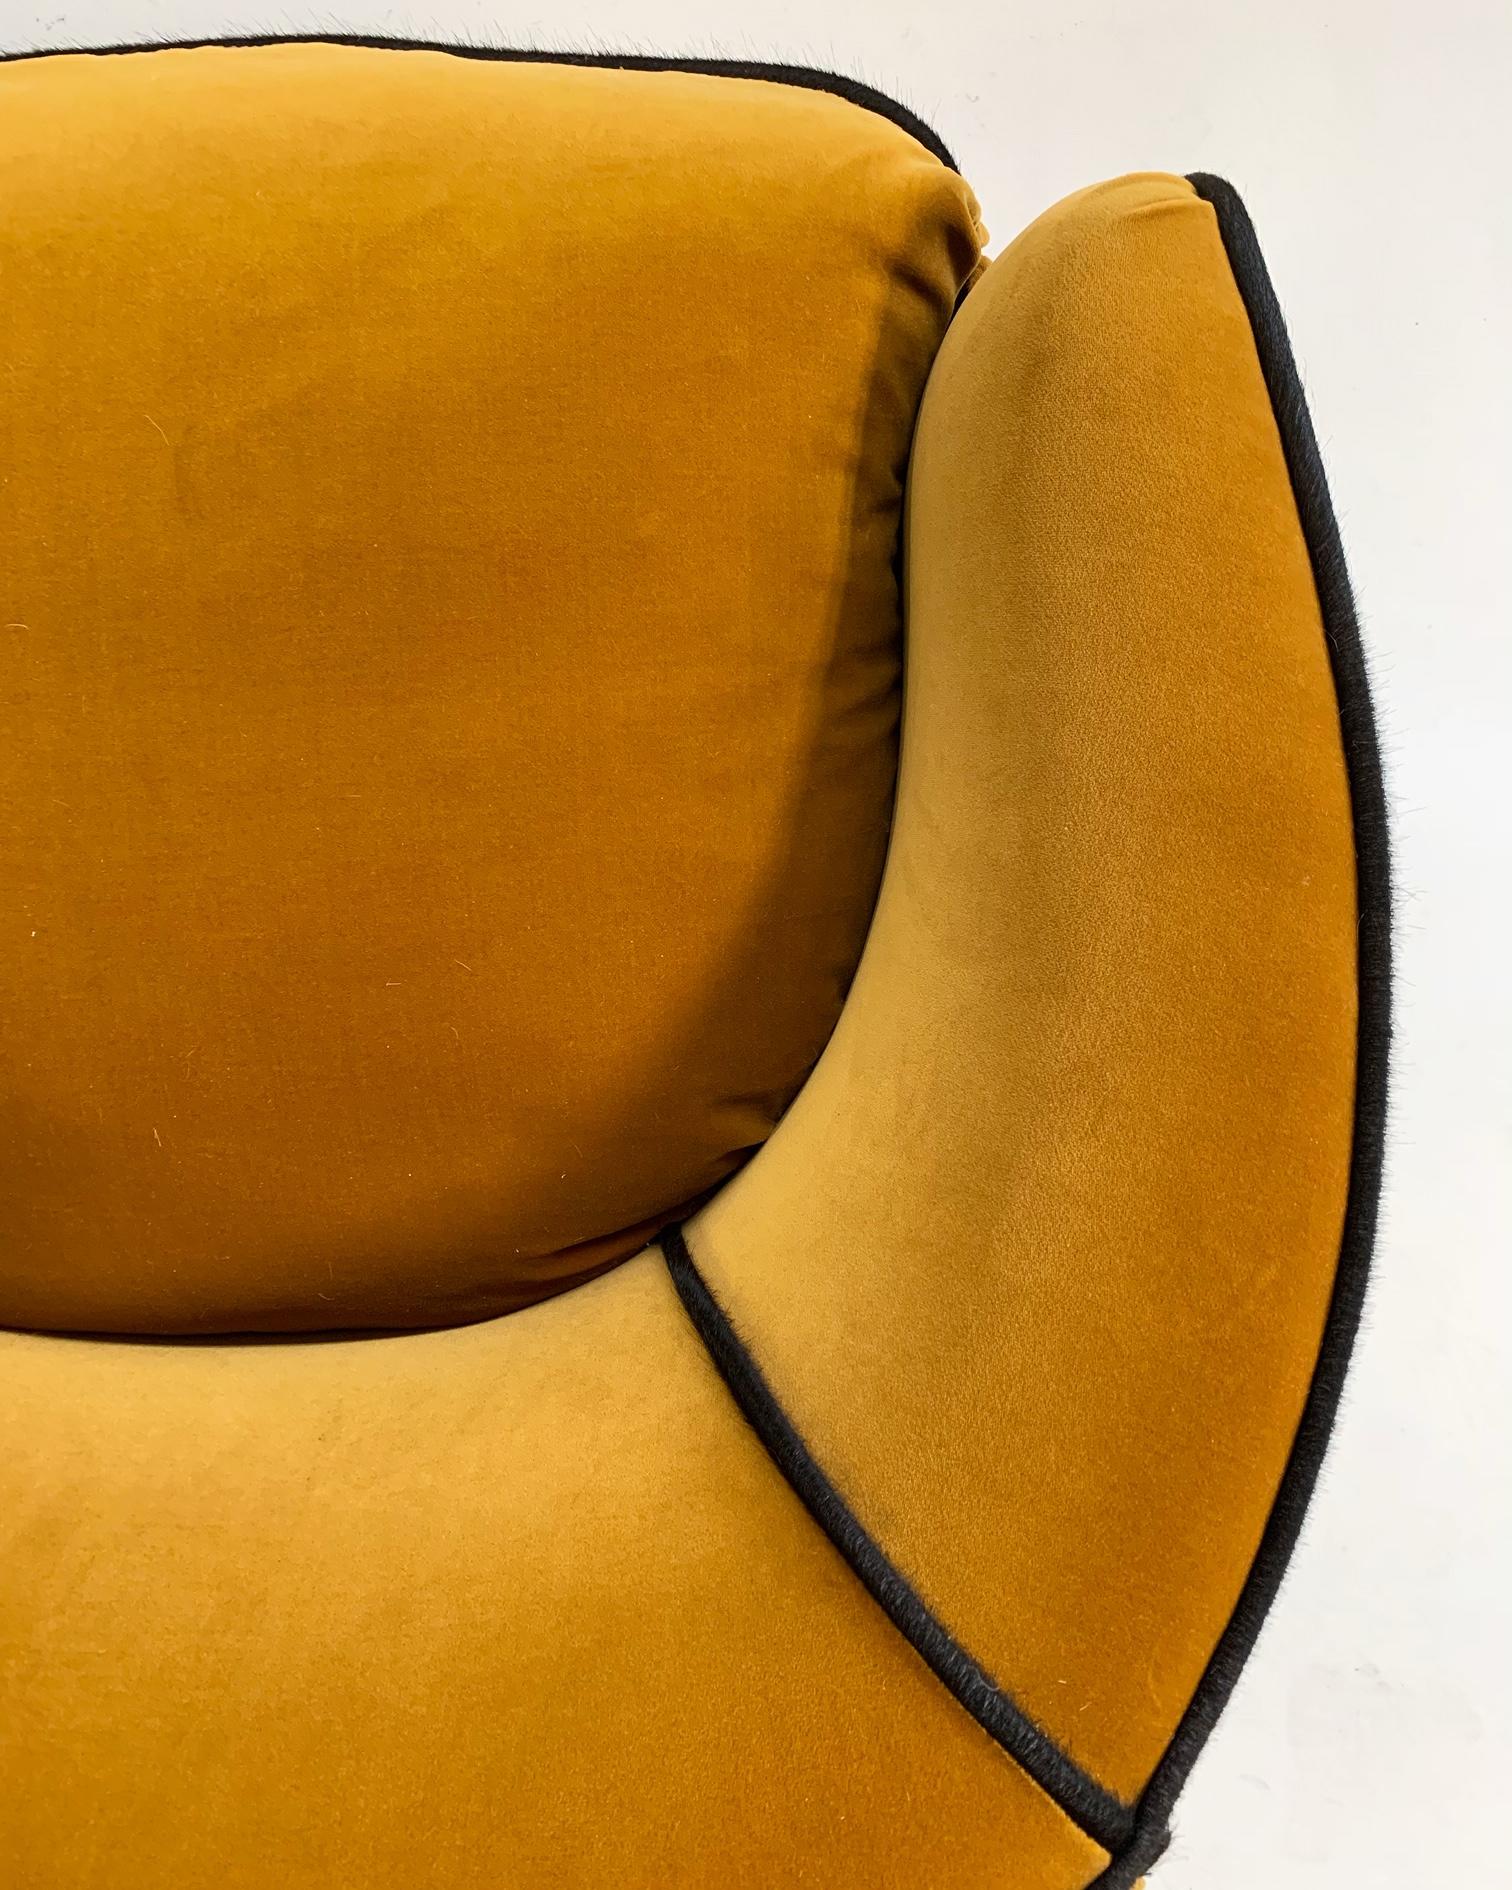 One of a Kind Vintage Lounge Chairs Restored in Loro Piana Velvet with Brazilian Cowhide Welting

These lounges are classic, simple, modern marvels. Our designers chose a ginger-hued Loro Piana velvet and welt of luxurious Brazilian black cowhide -